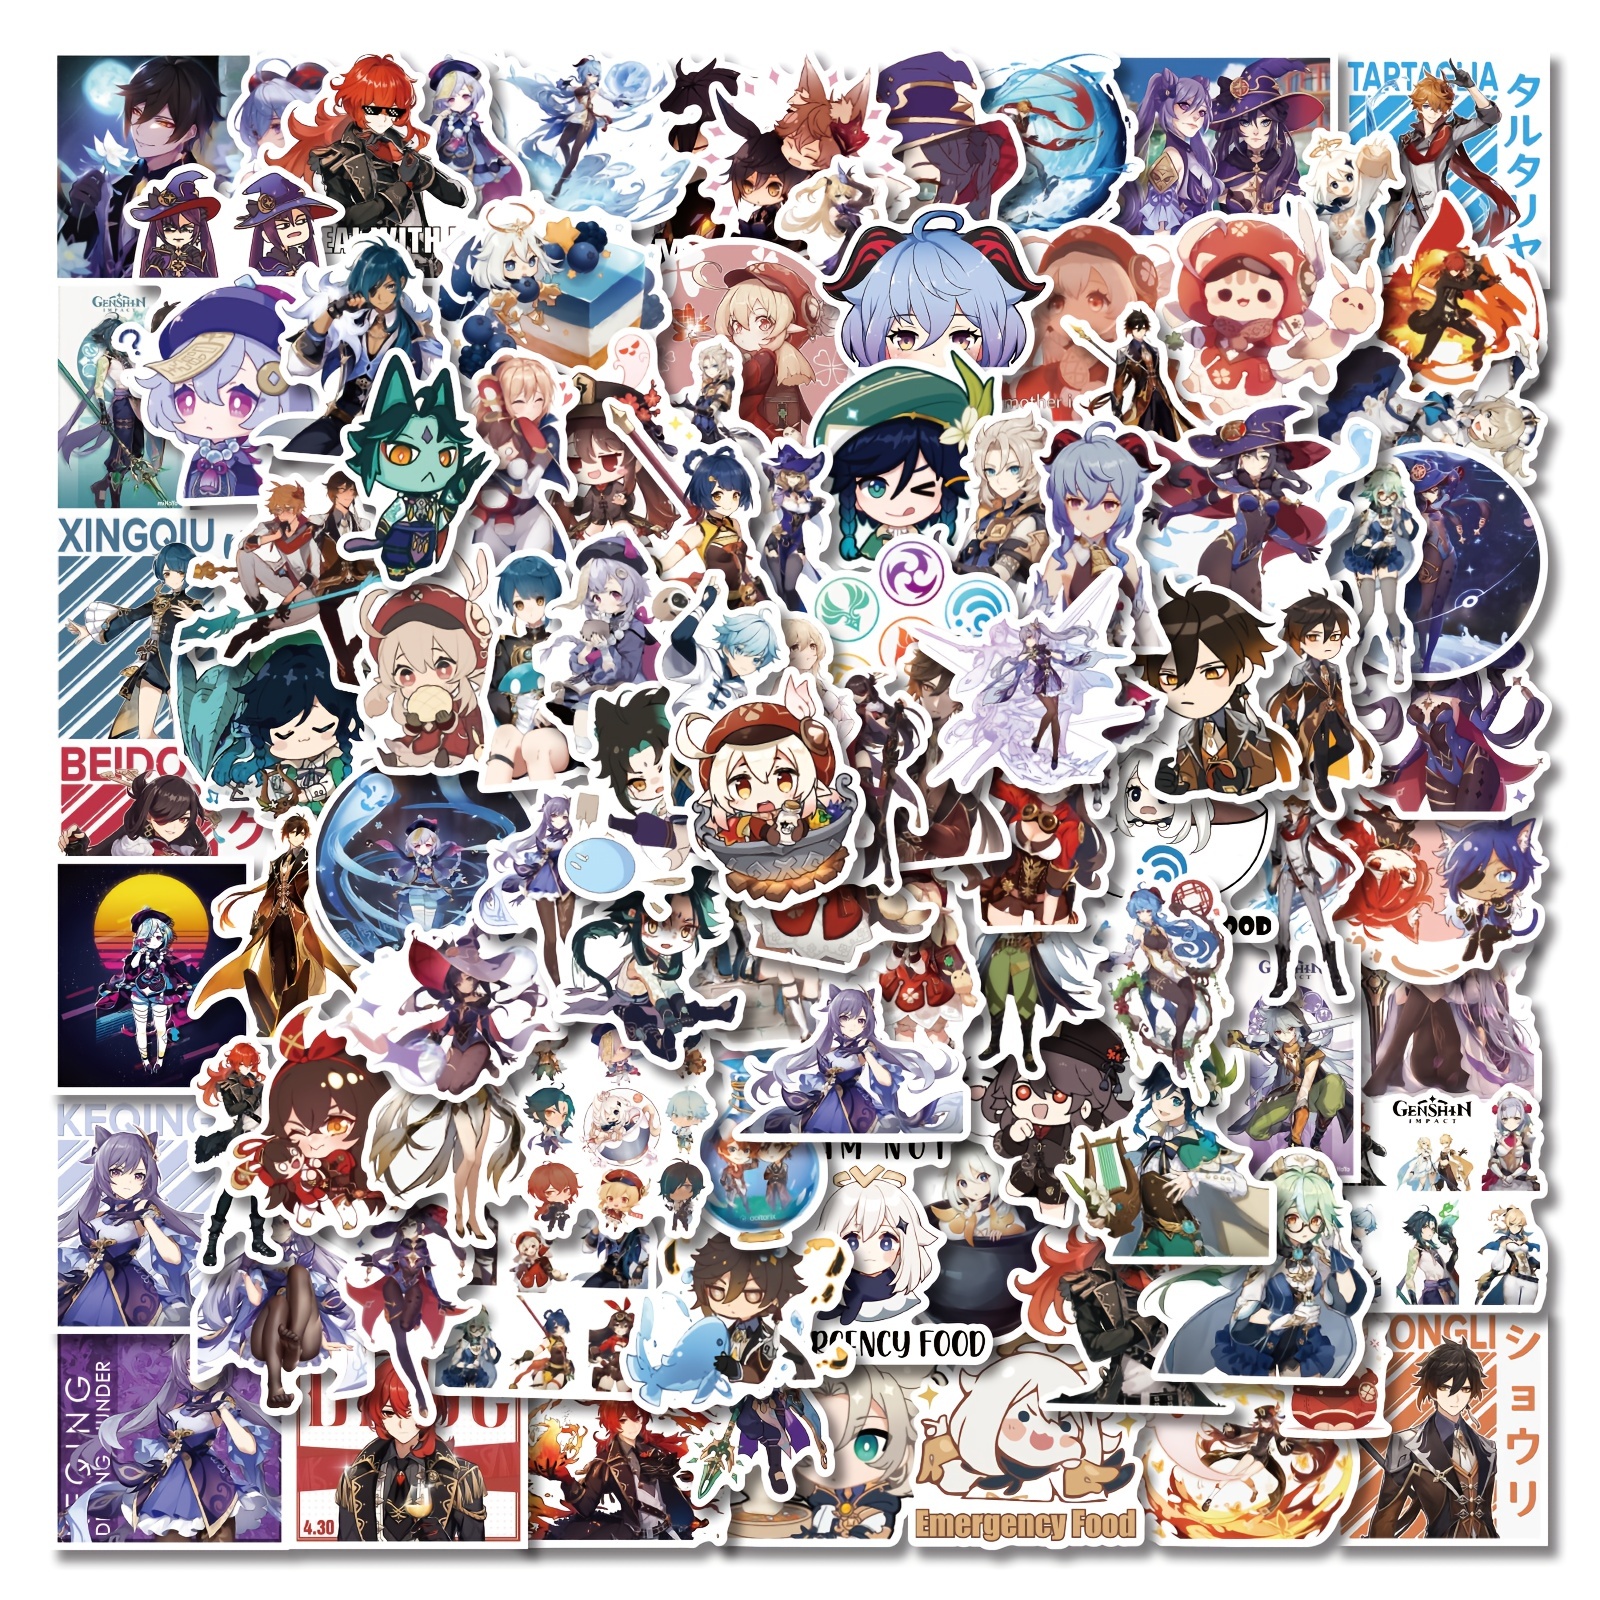 10/50/100pcs Anime Naruto Stickers for Laptop Graffiti Suitcase Car  Waterproof Cartoon Sticker Decal Children Toy Gift